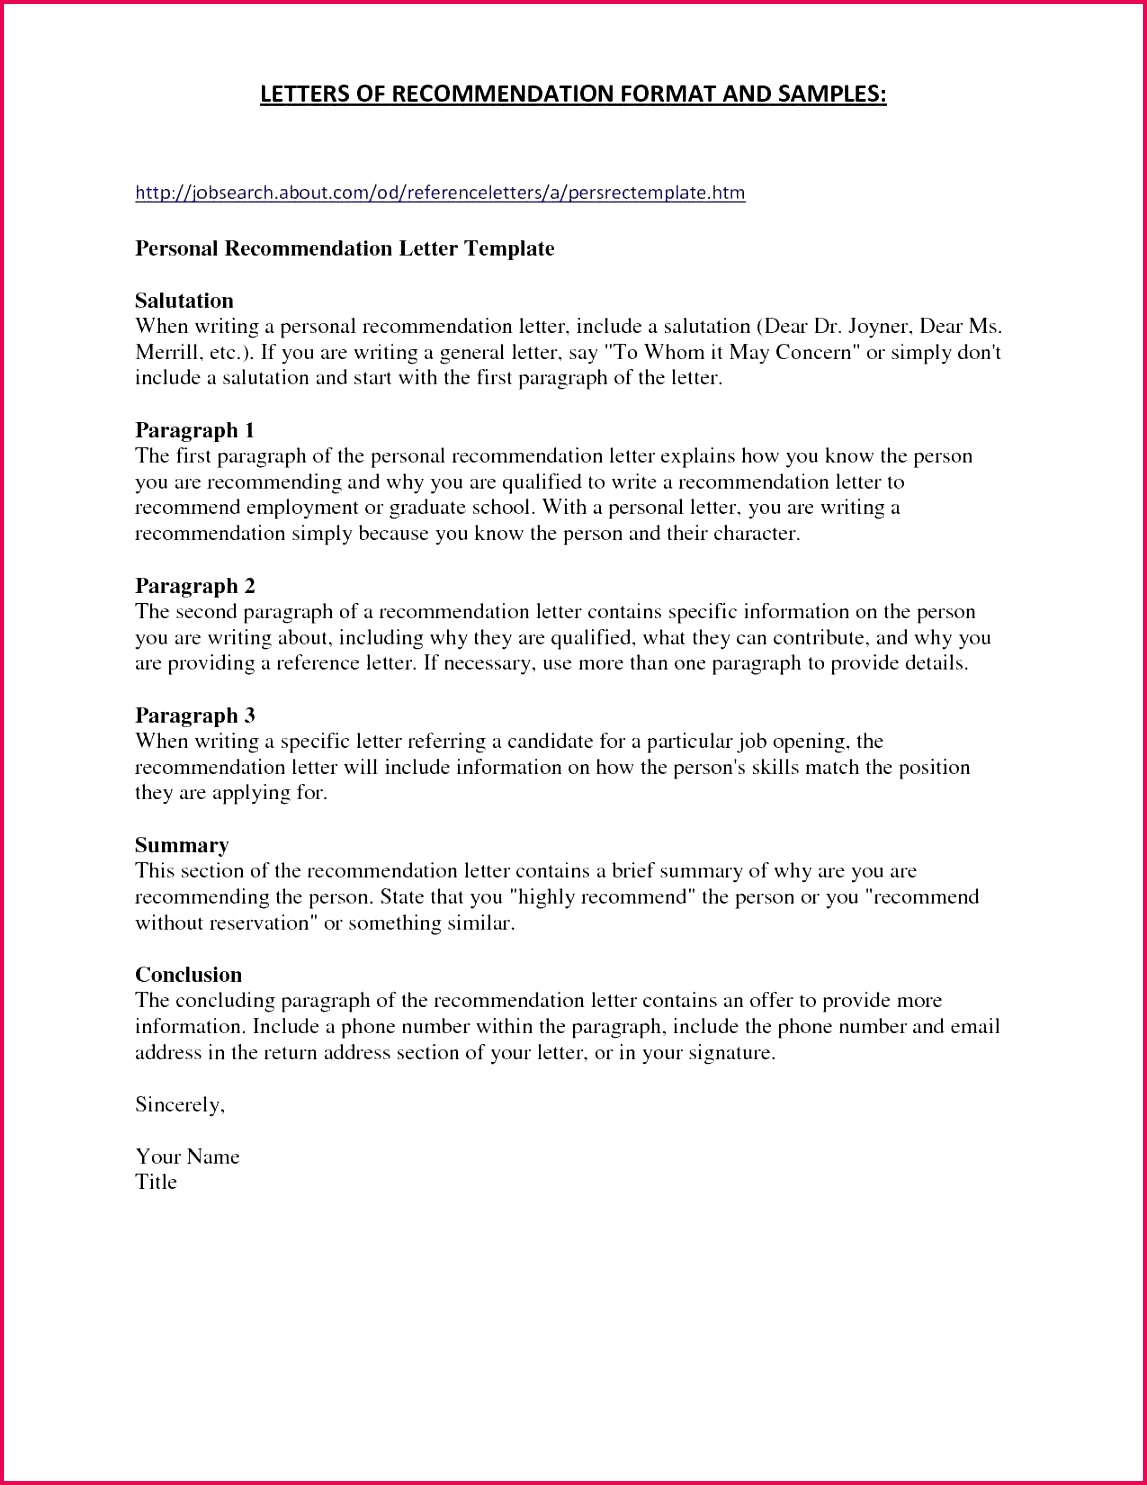 confirmation letter format word document awesome employment verification letter template microsoft collection photos of confirmation letter format word document